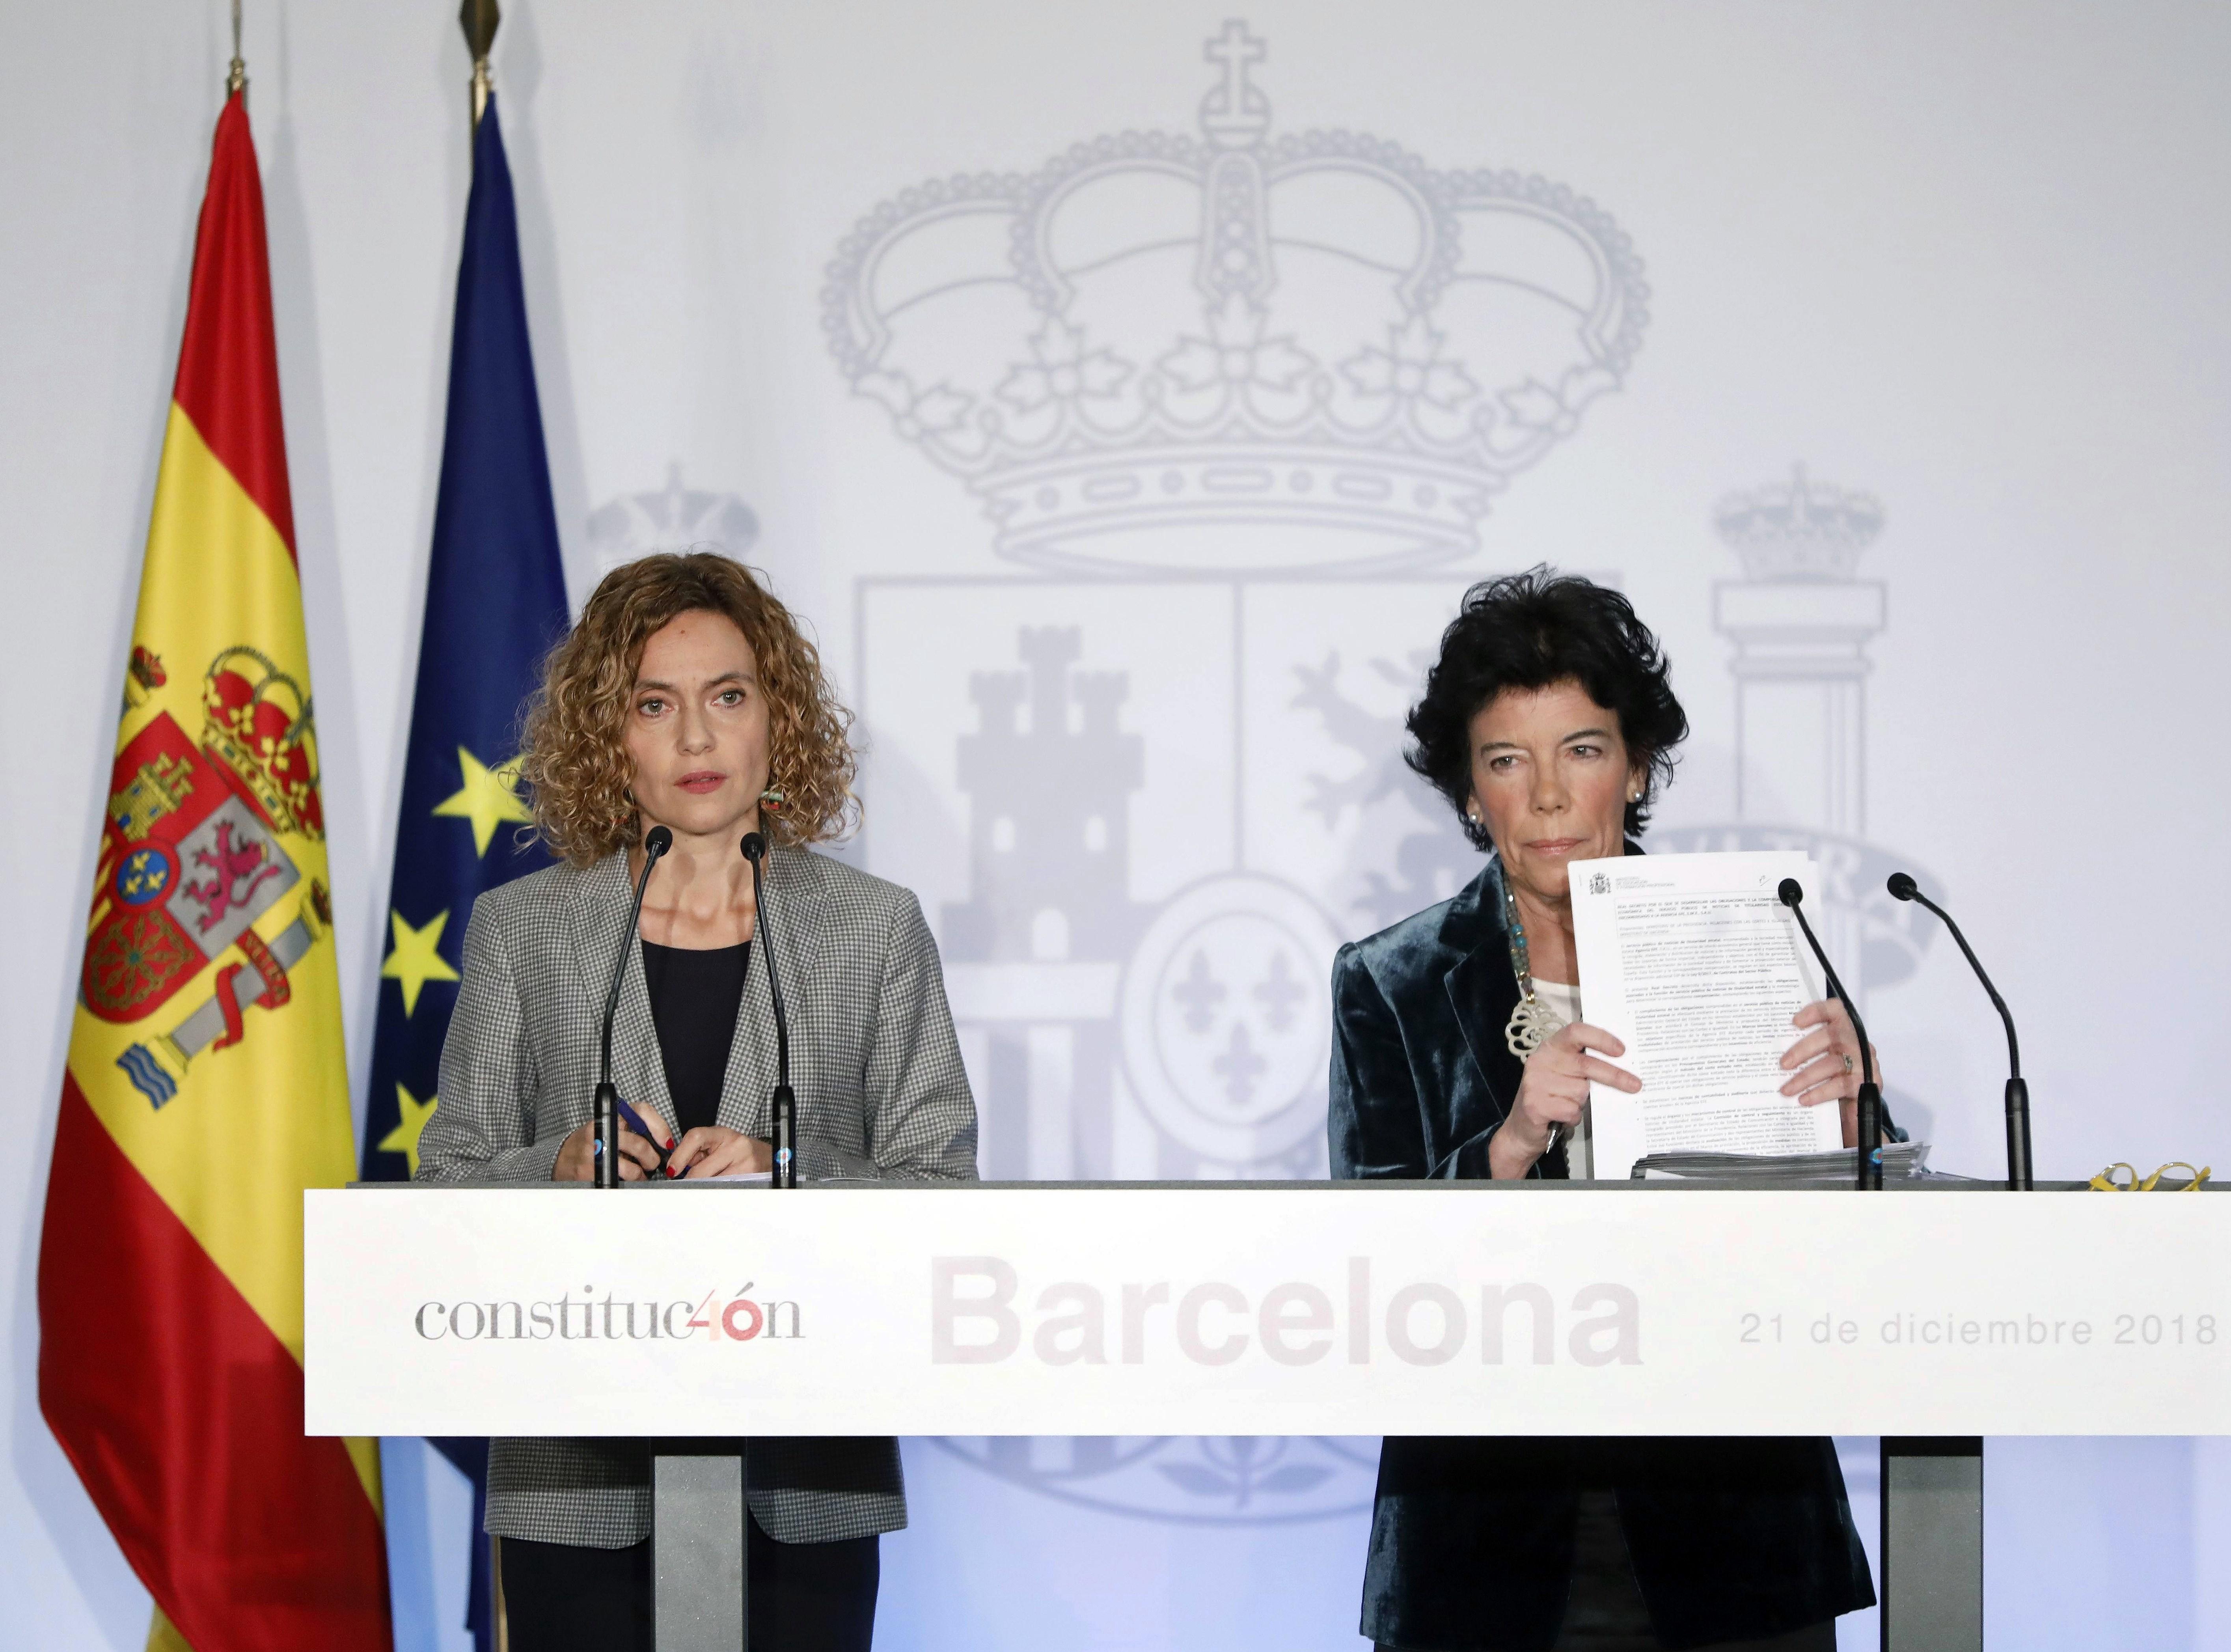 The Spanish government, in Barcelona, avoids discussing the Catalan prisoners